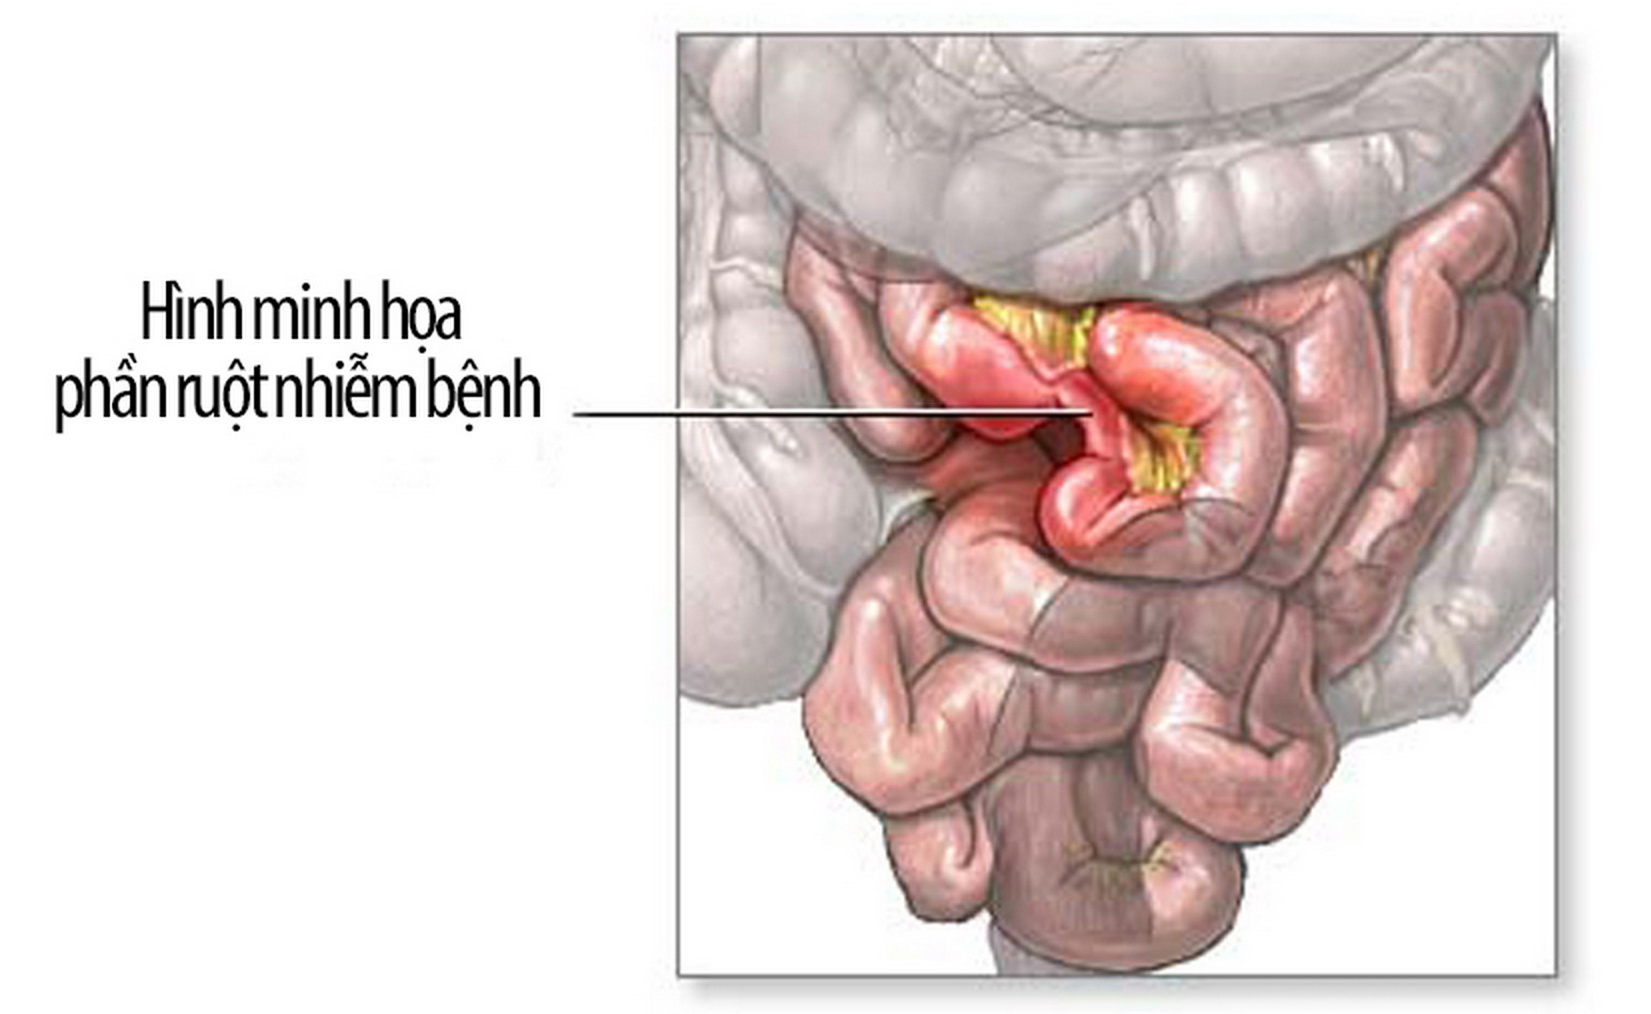 small-bowel-resection-series-2_resize